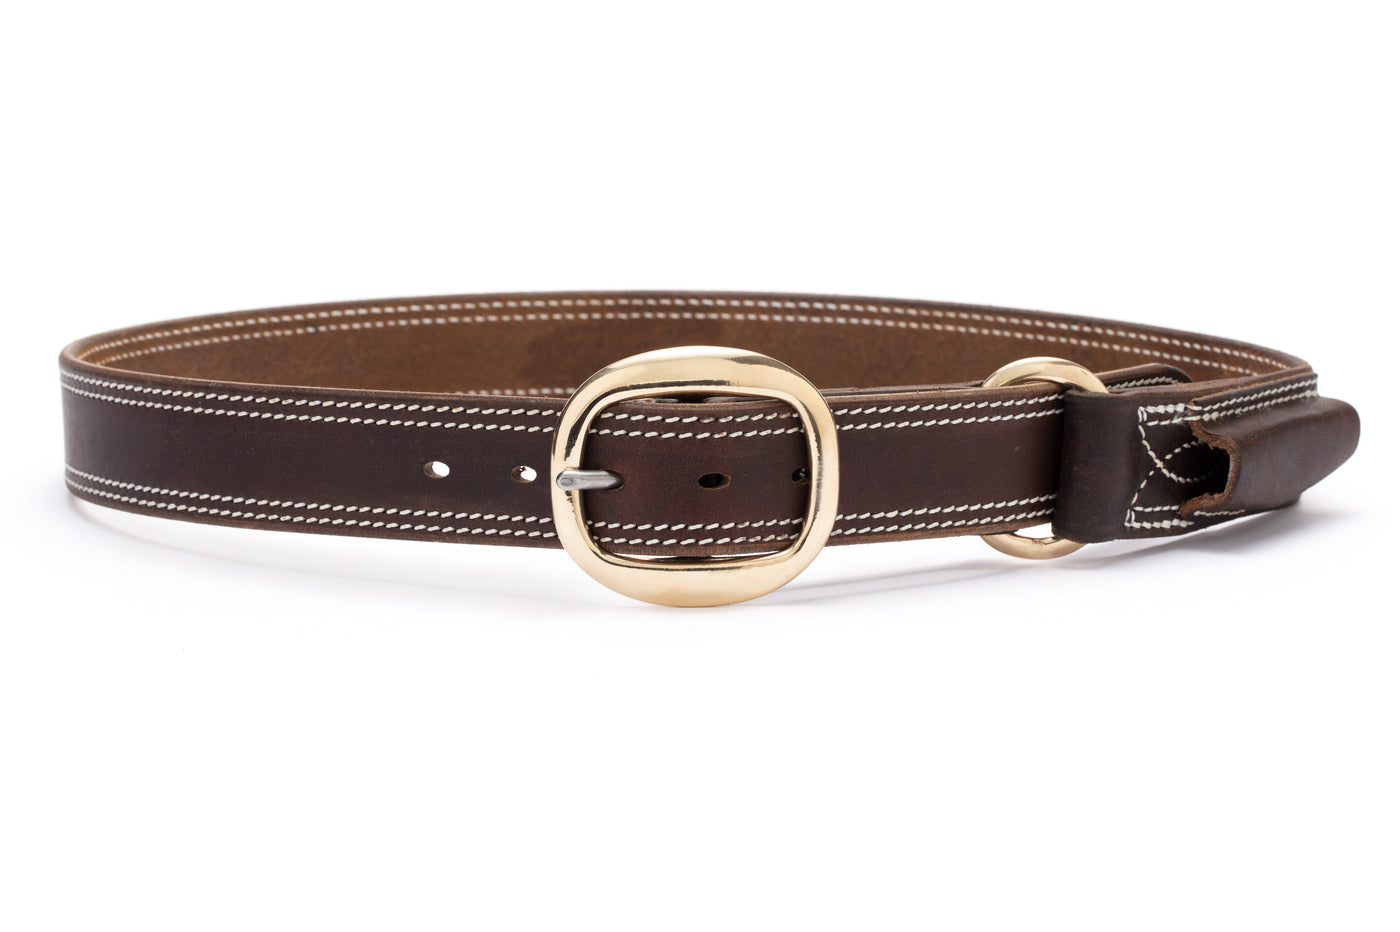 Leather Work Belts | Buy Australian Made Leather Belts Online - Angus ...